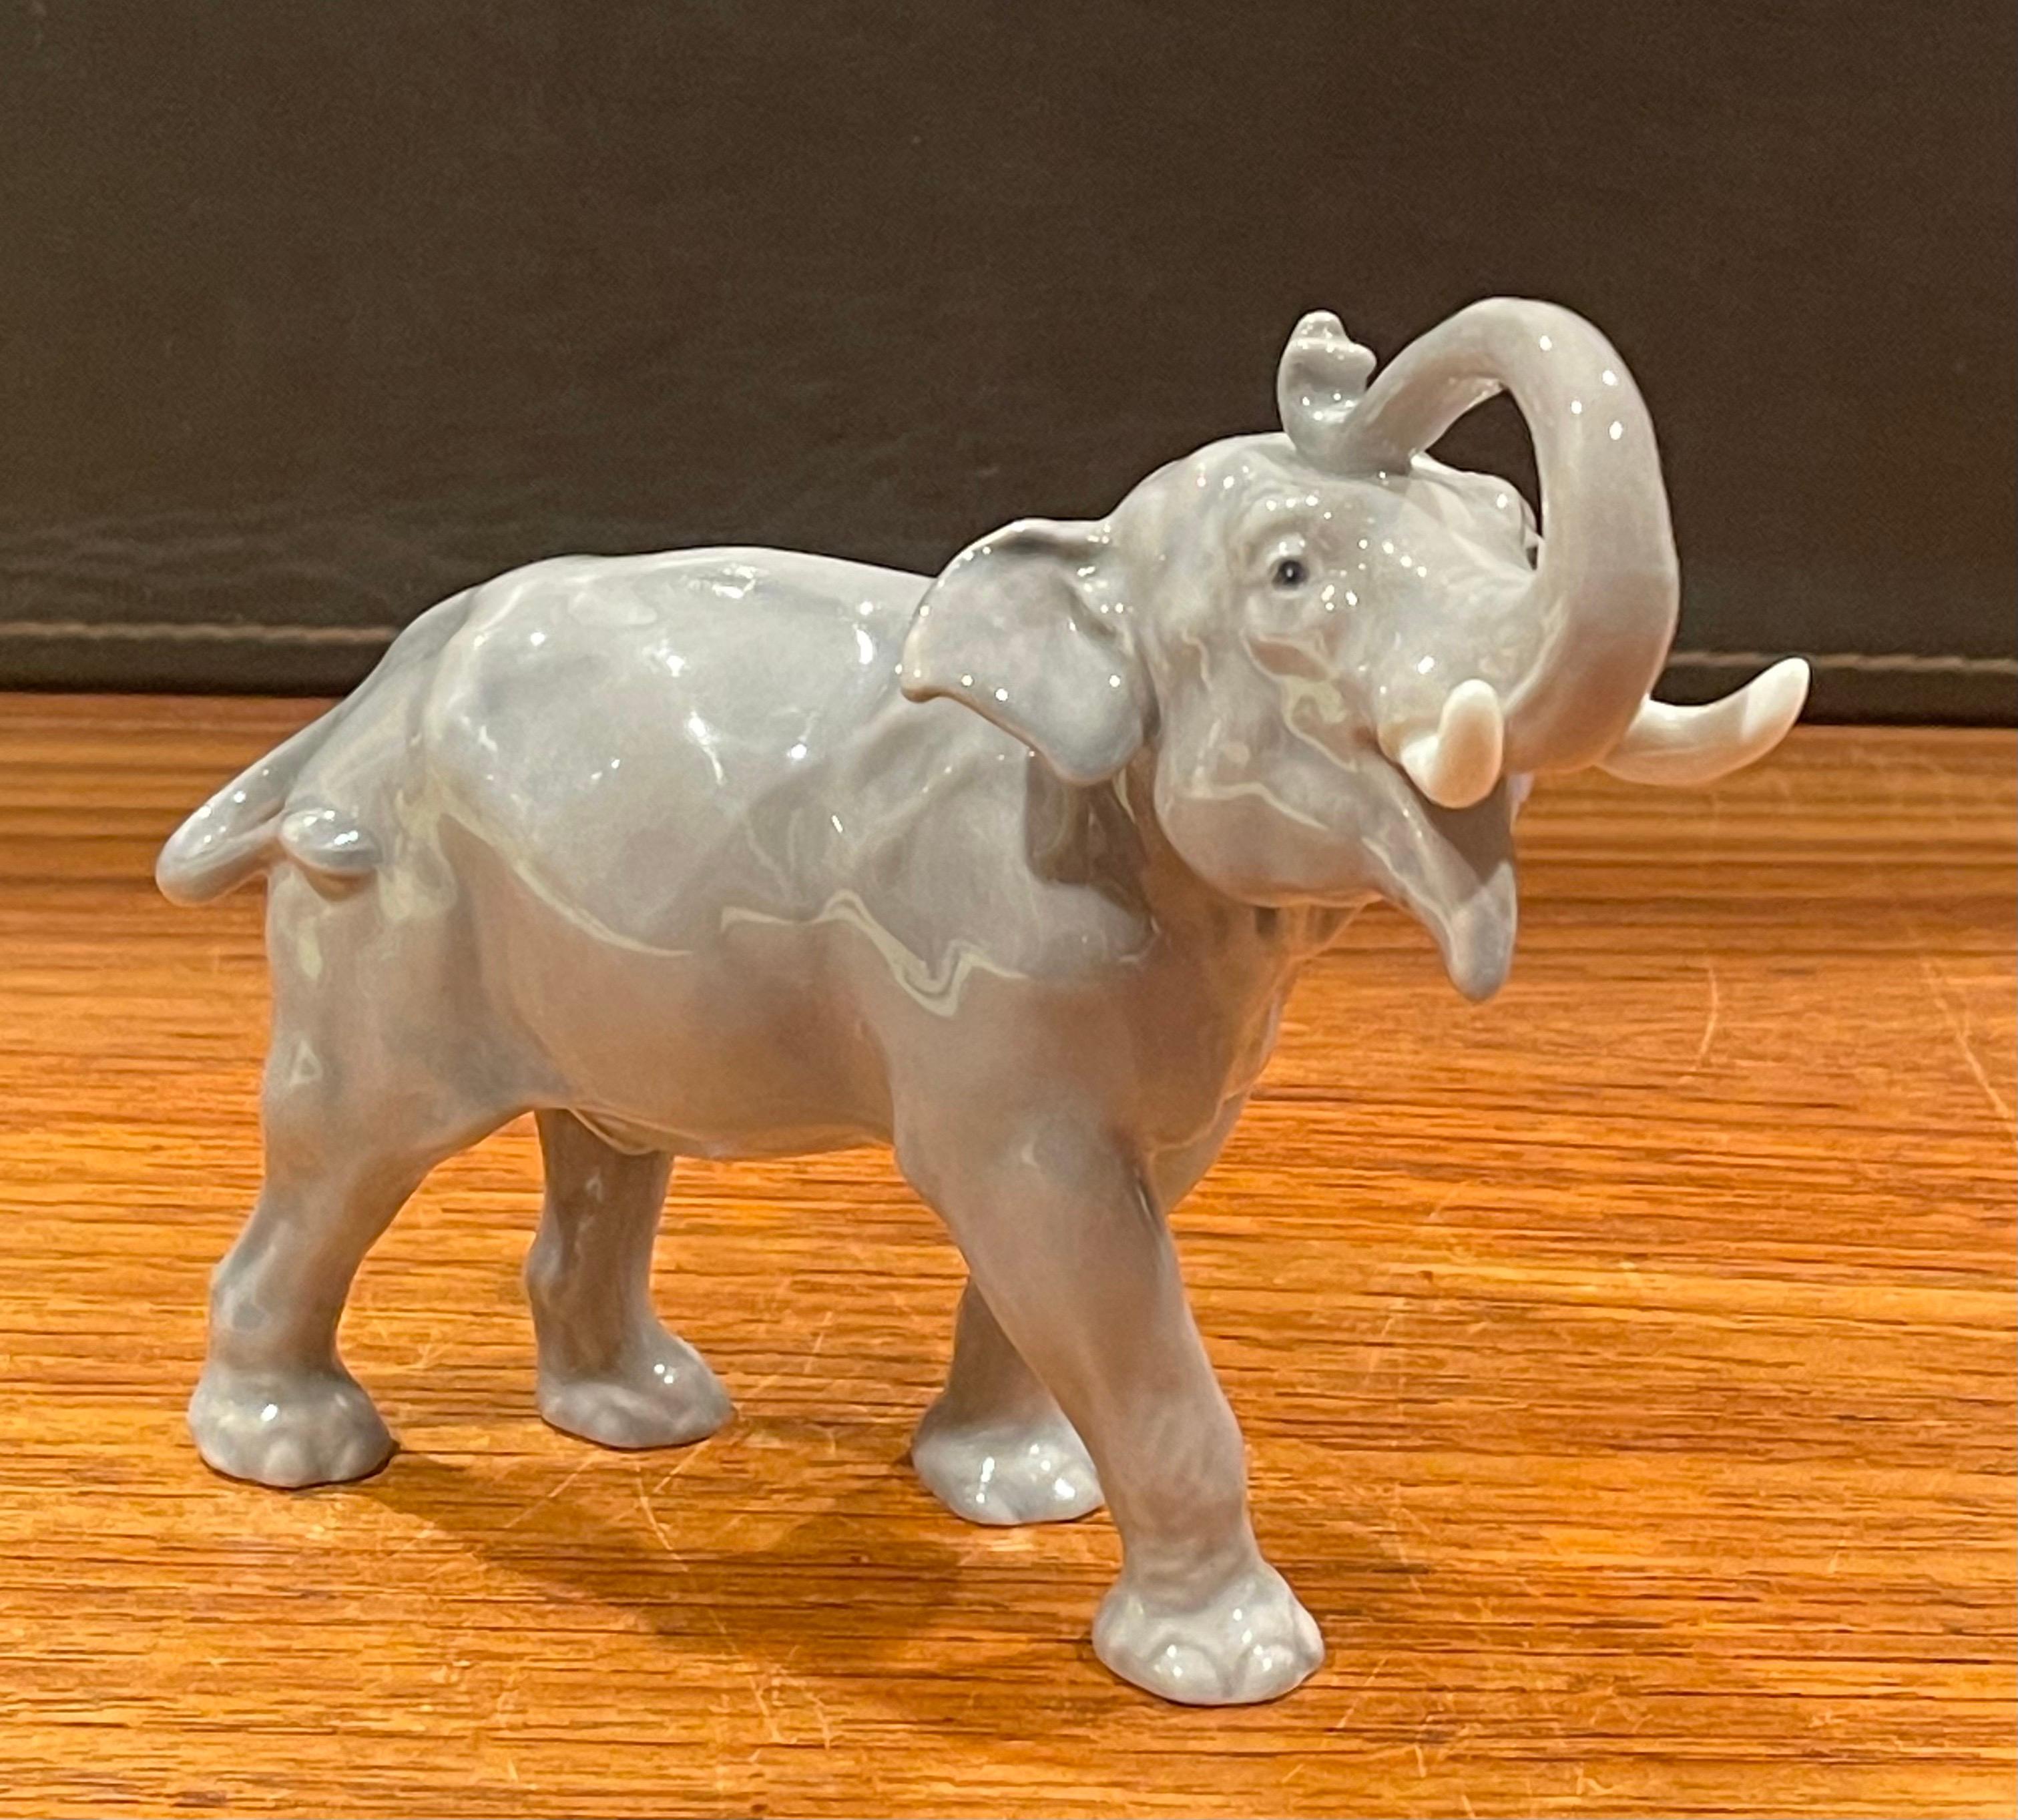 A very nice hand painted porcelain elephant sculpture by Bing & Grondahl of Denmark, circa 1970s. The piece is in very good vintage condition with no chips or cracks and measures 6